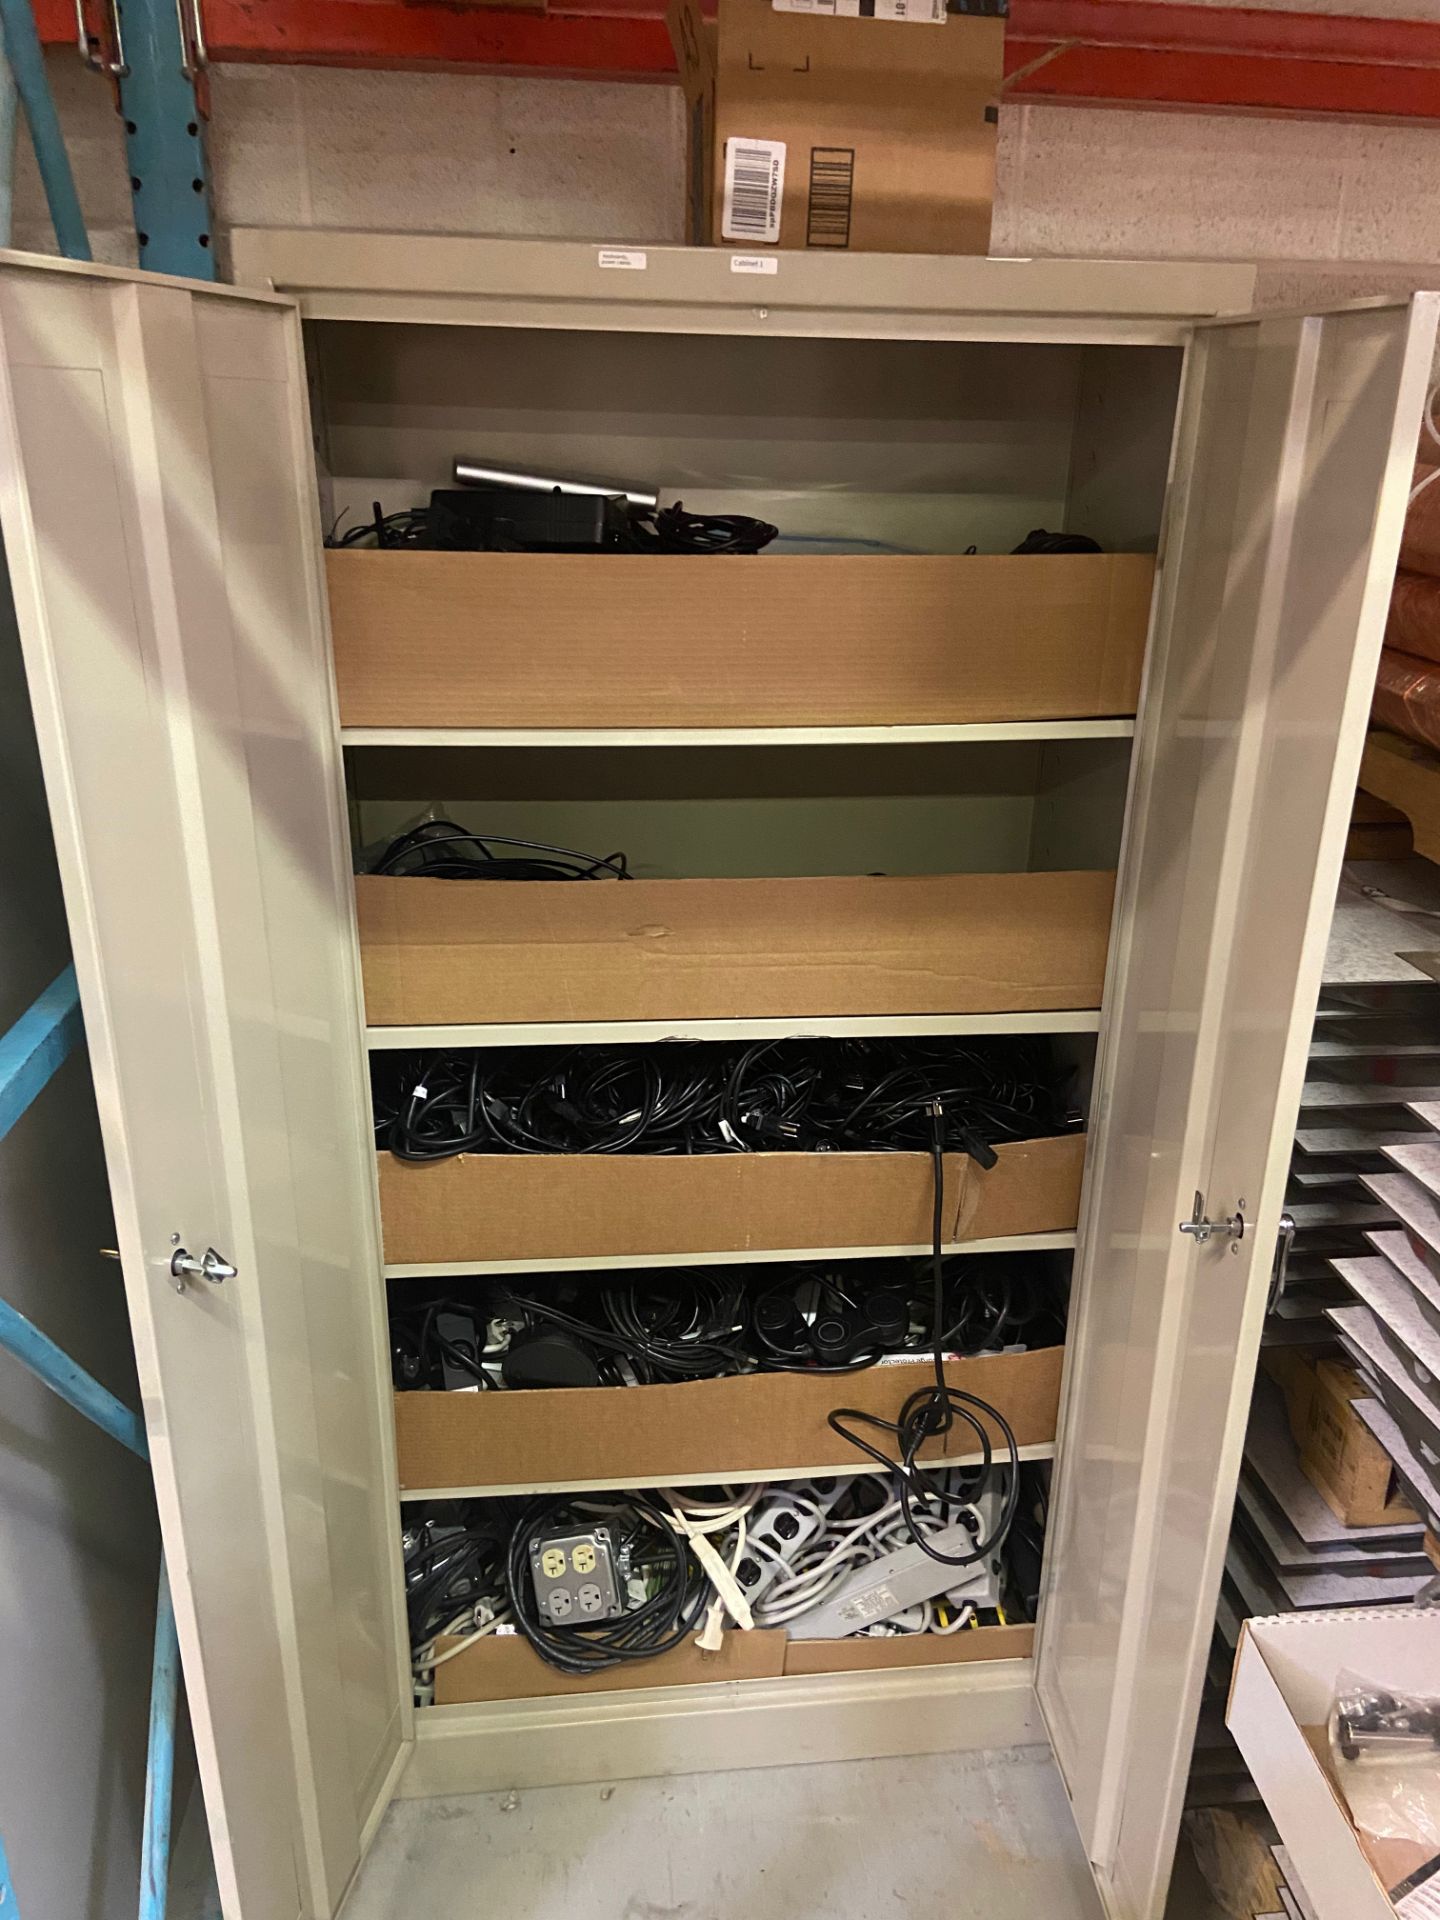 Cabinet and Contents (See Photos), Rigging Fee: $50